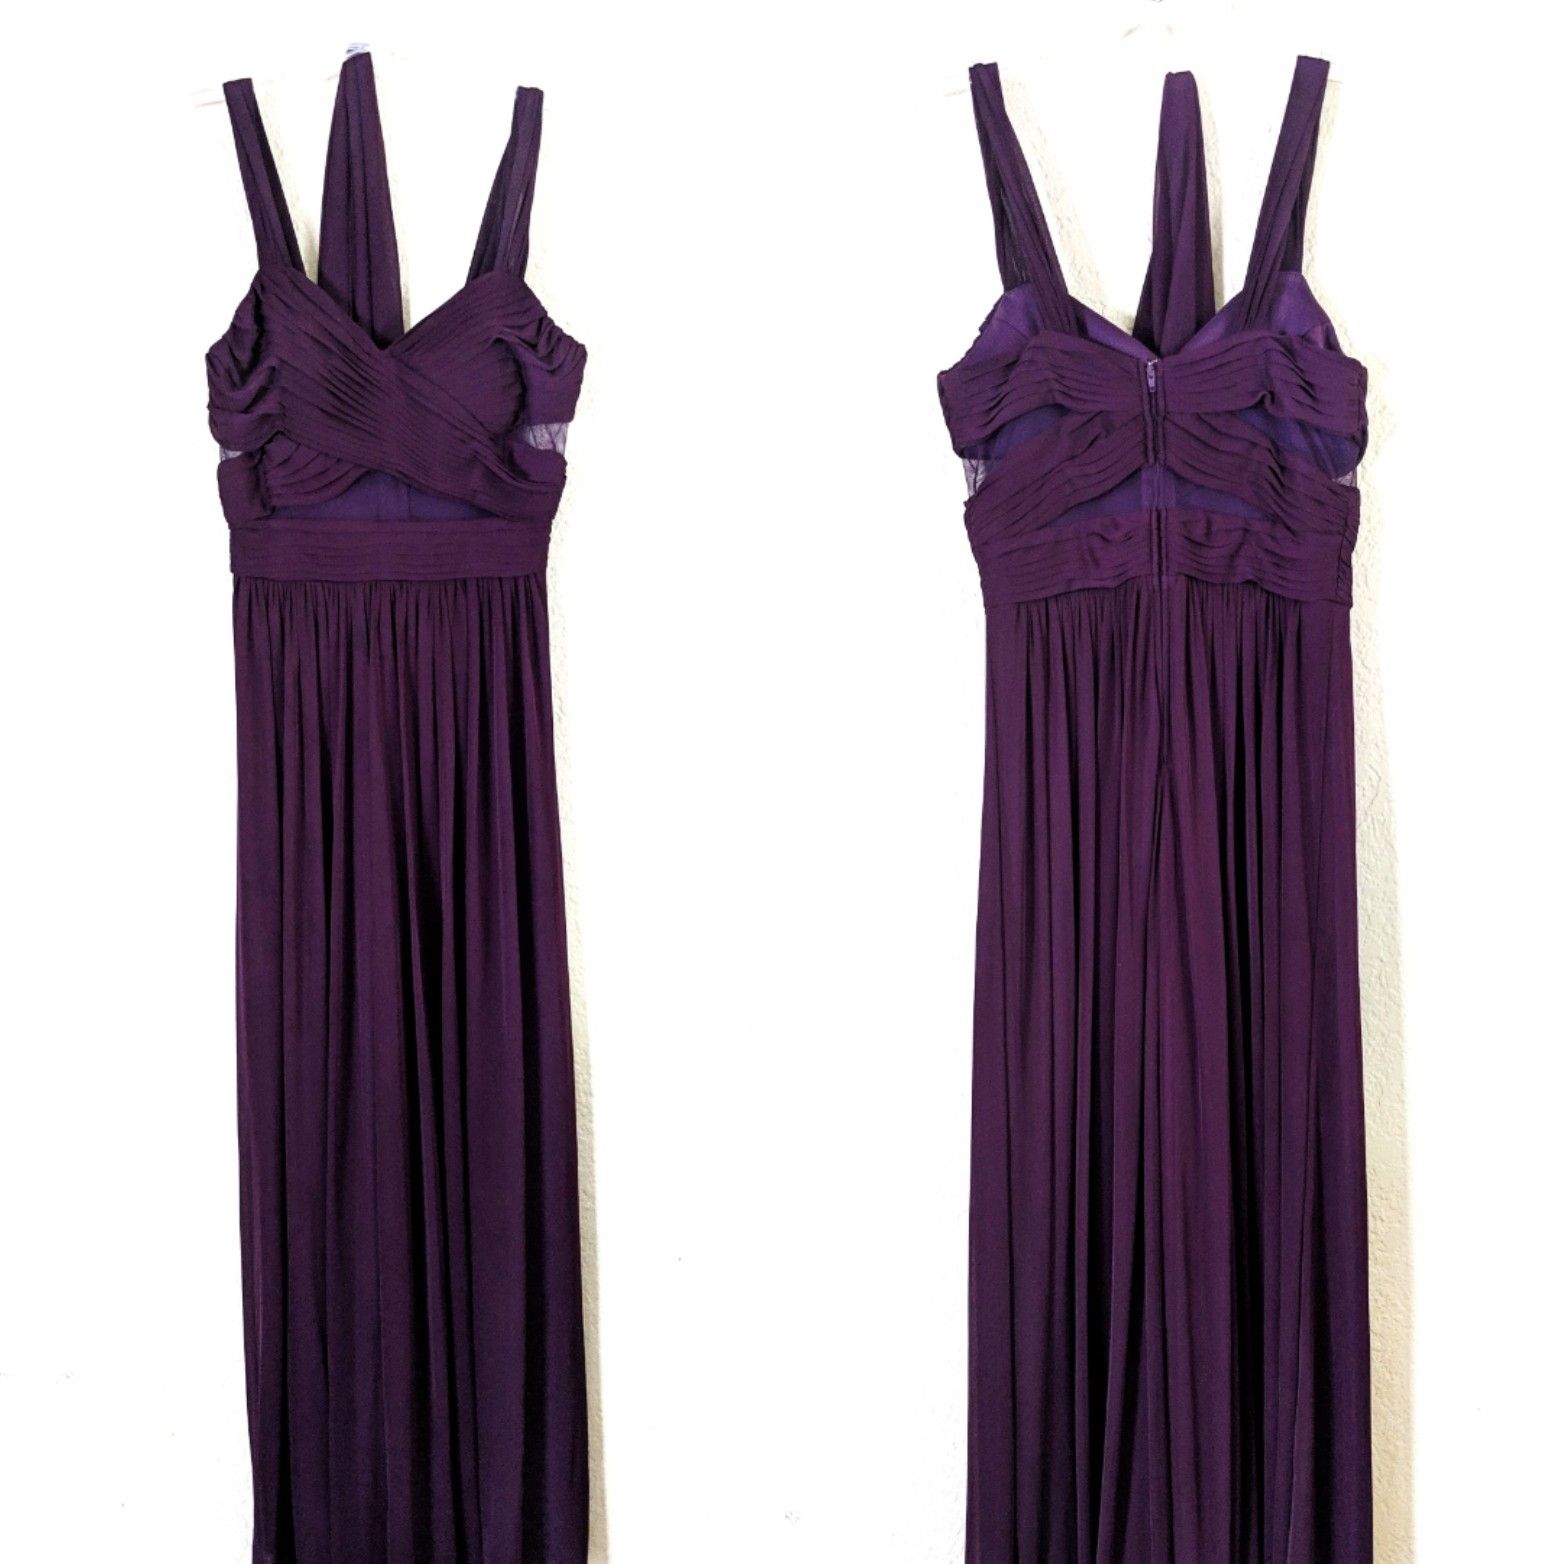 Evening Gown prom bridesmaid wedding guest long purple dress